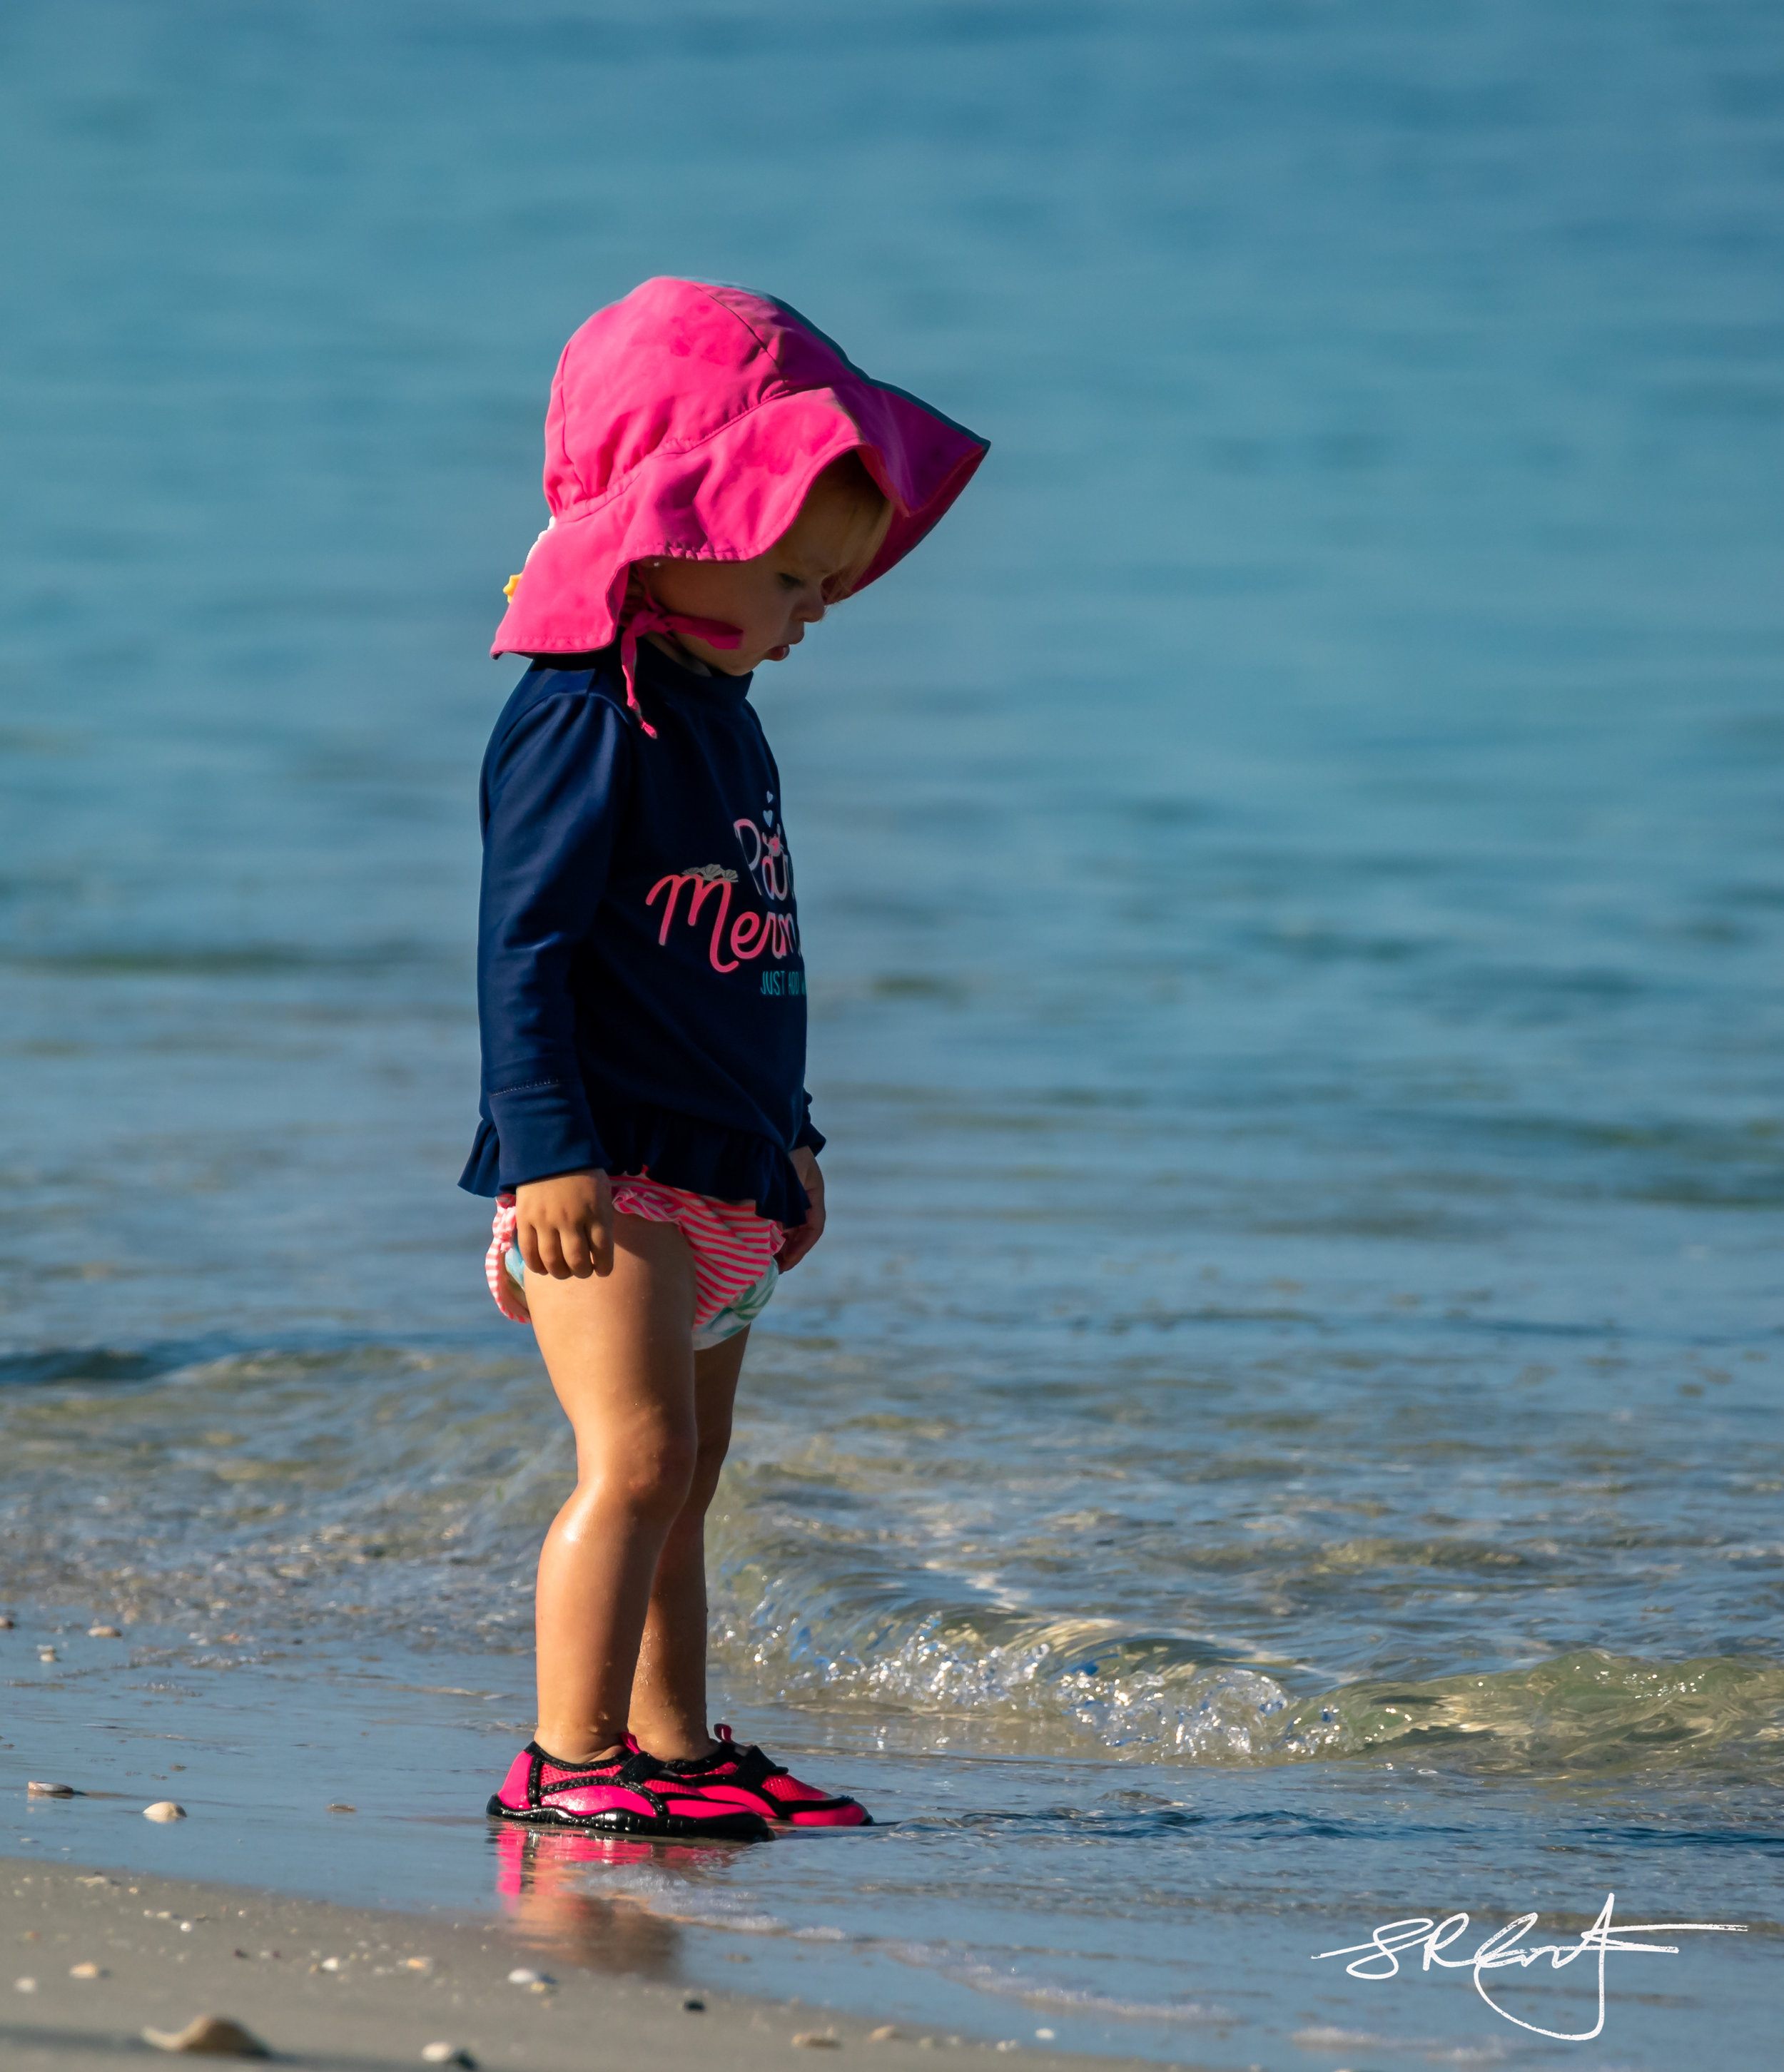 Never too young to enjoy the beach.